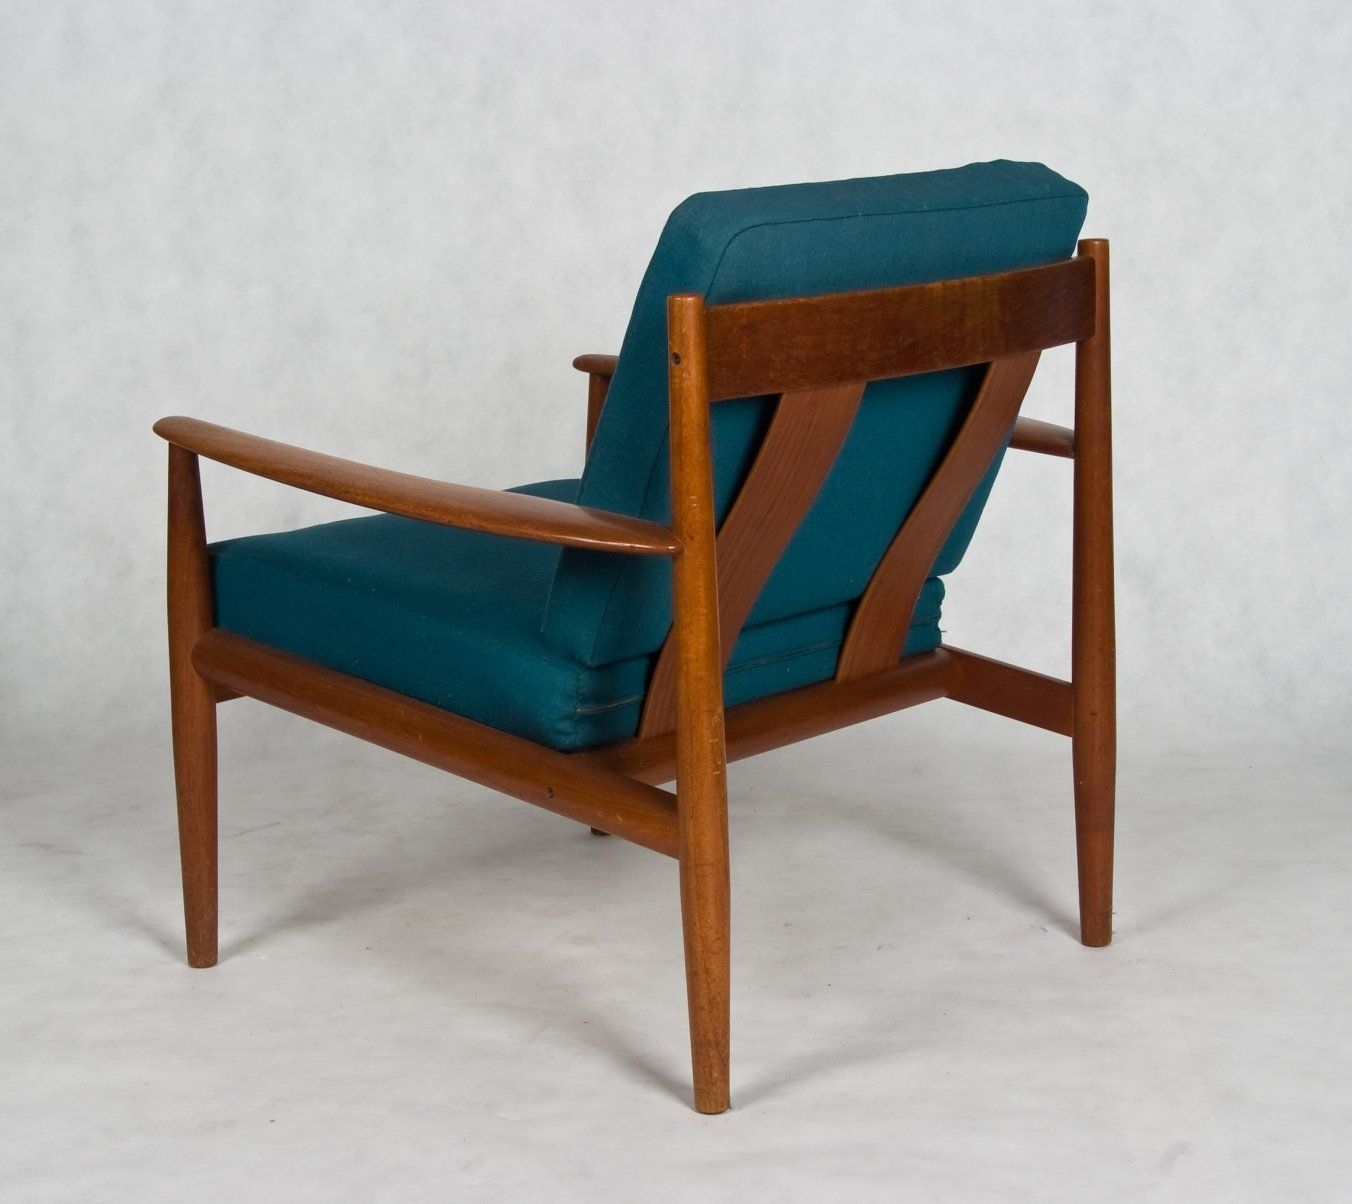 Danish arm chair with teak frame designed by grete jalk